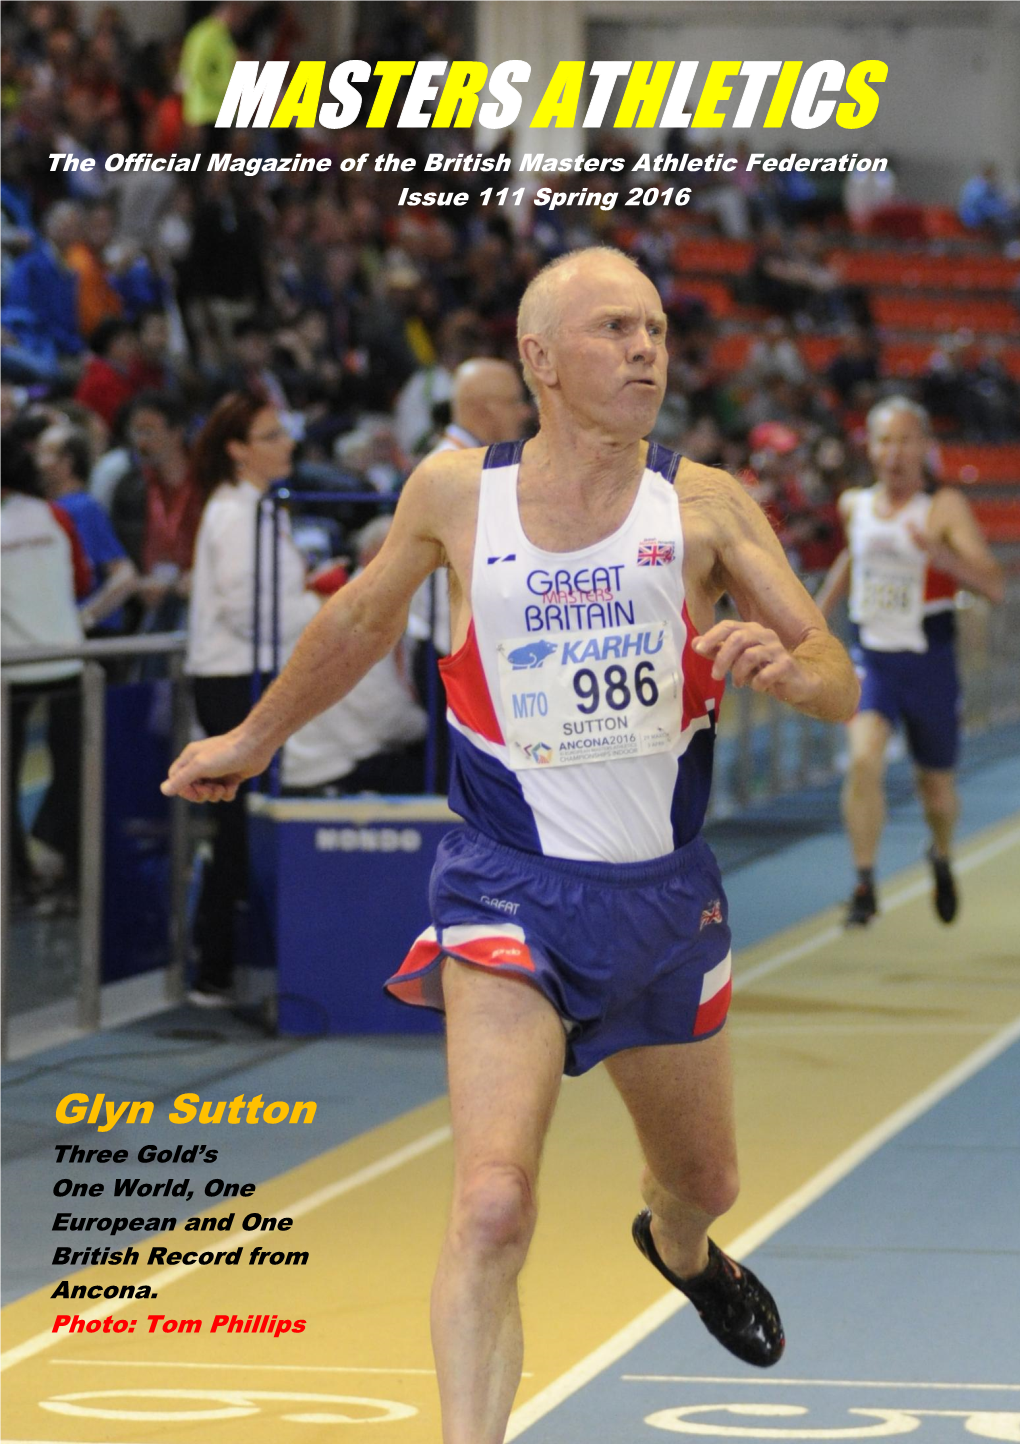 MASTERS ATHLETICS the Official Magazine of the British Masters Athletic Federation Issue 111 Spring 2016